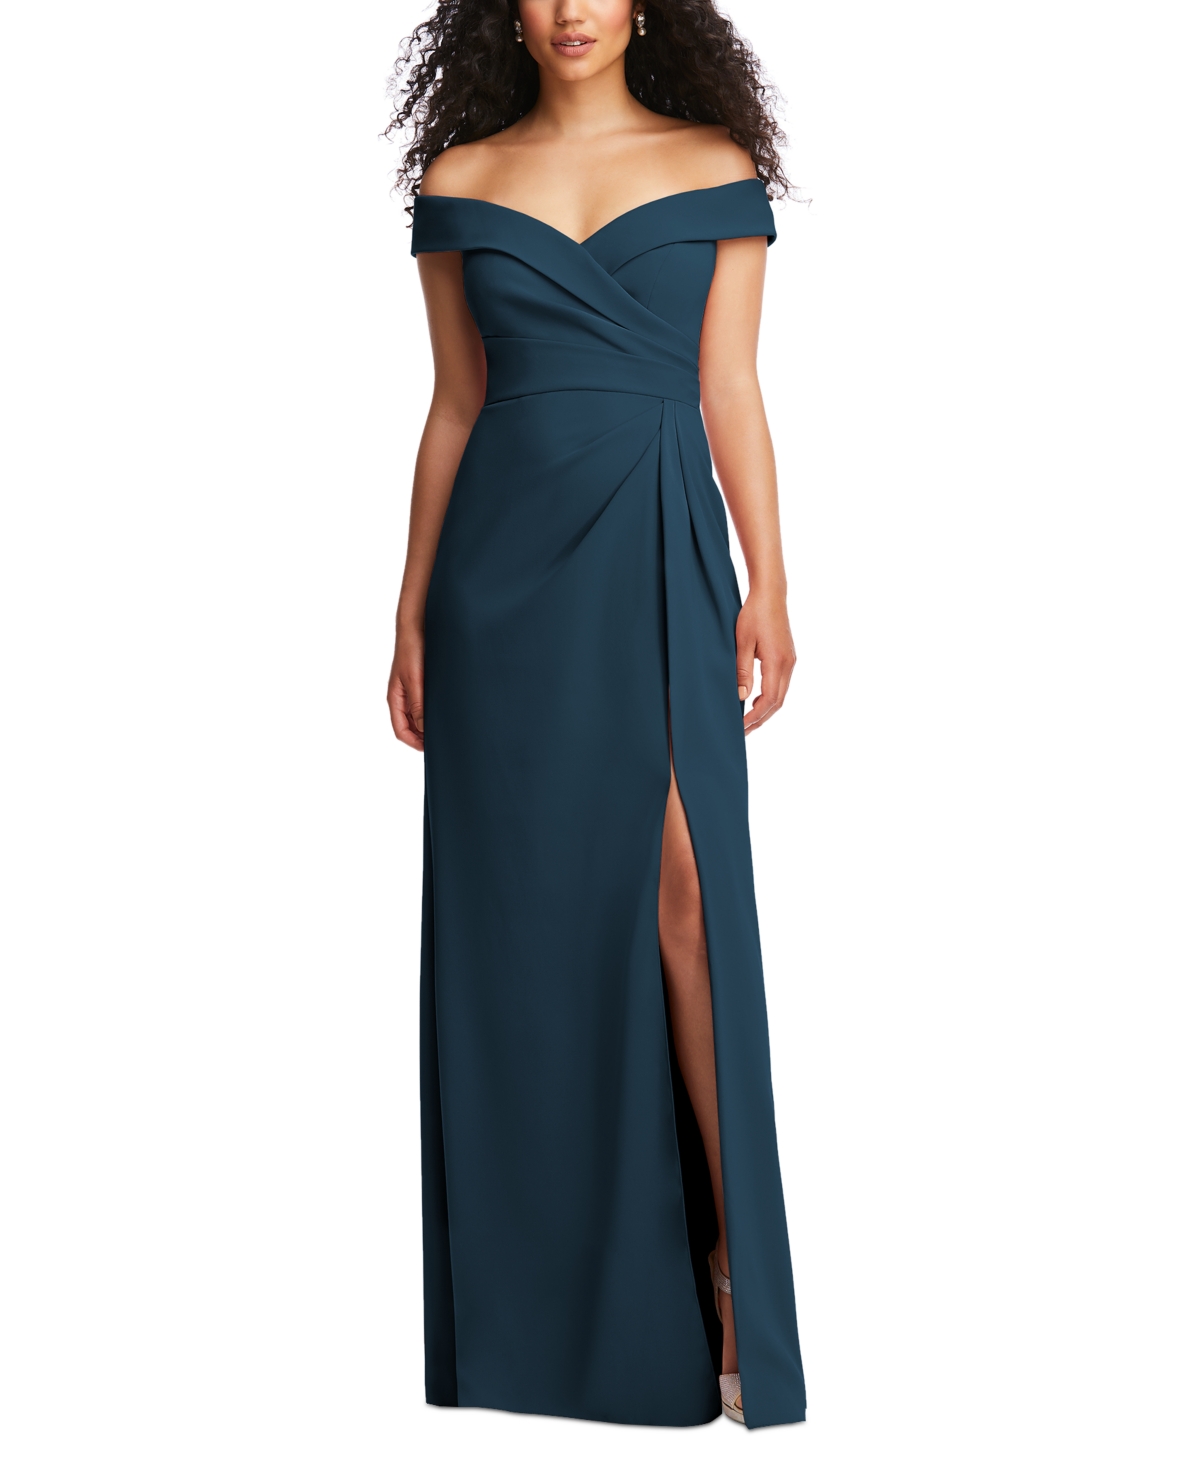 AFTER SIX WOMEN'S PLEATED-BODICE OFF-THE-SHOULDER DRESS